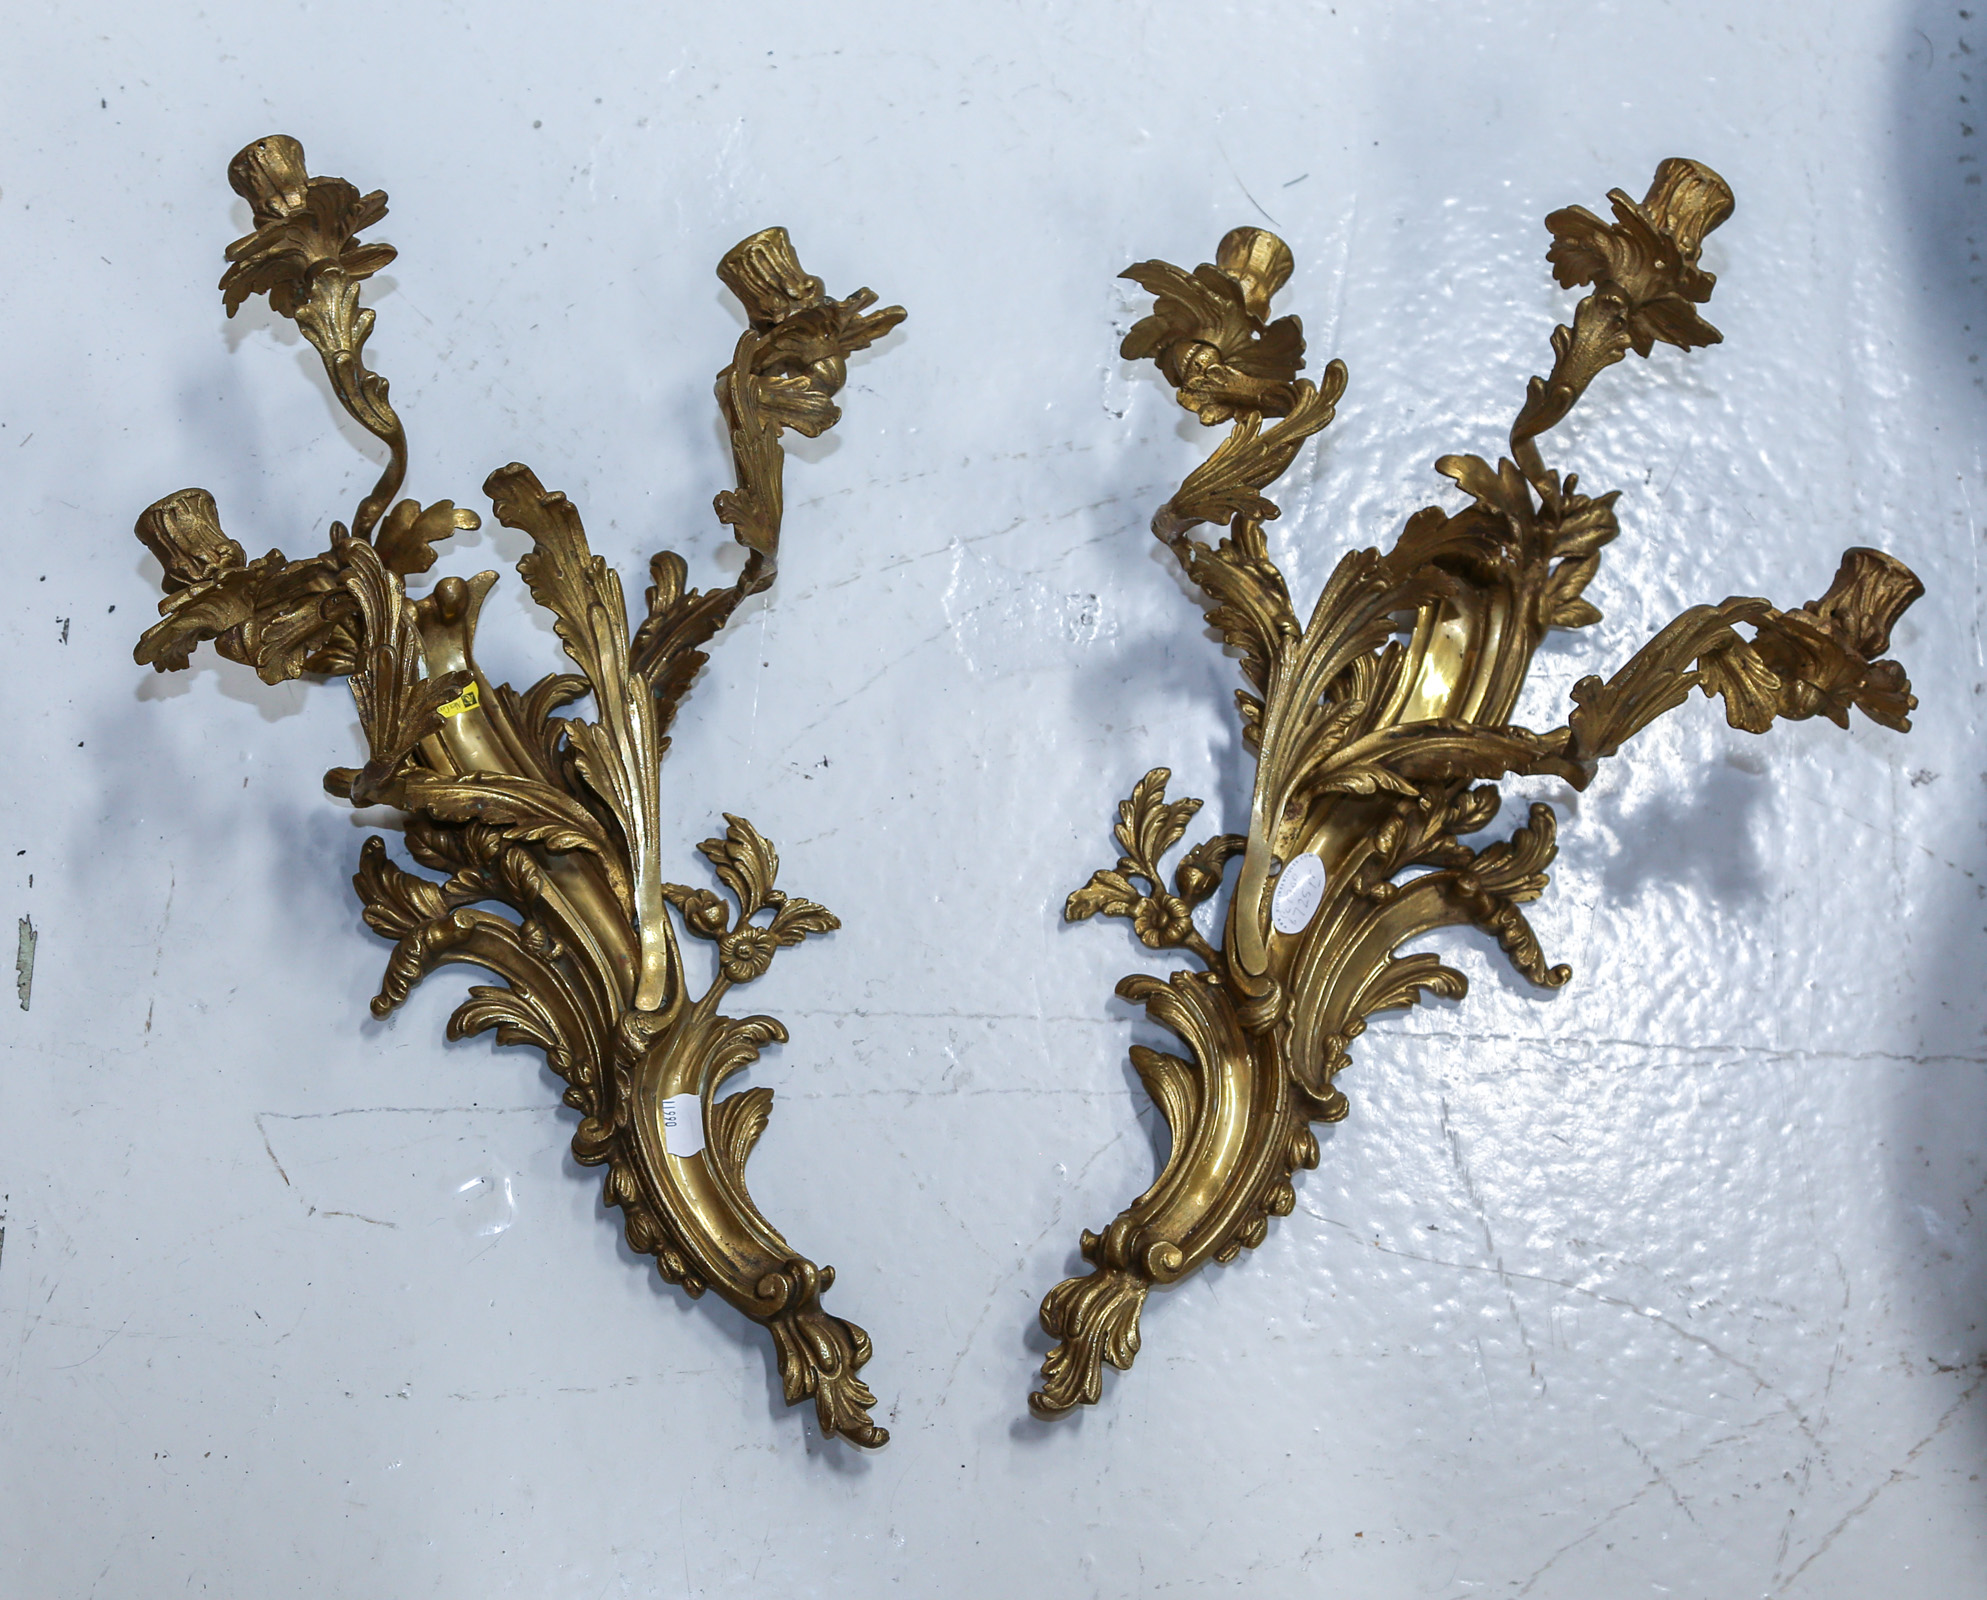 A PAIR OF ROCOCO GILT BRONZE CANDLE